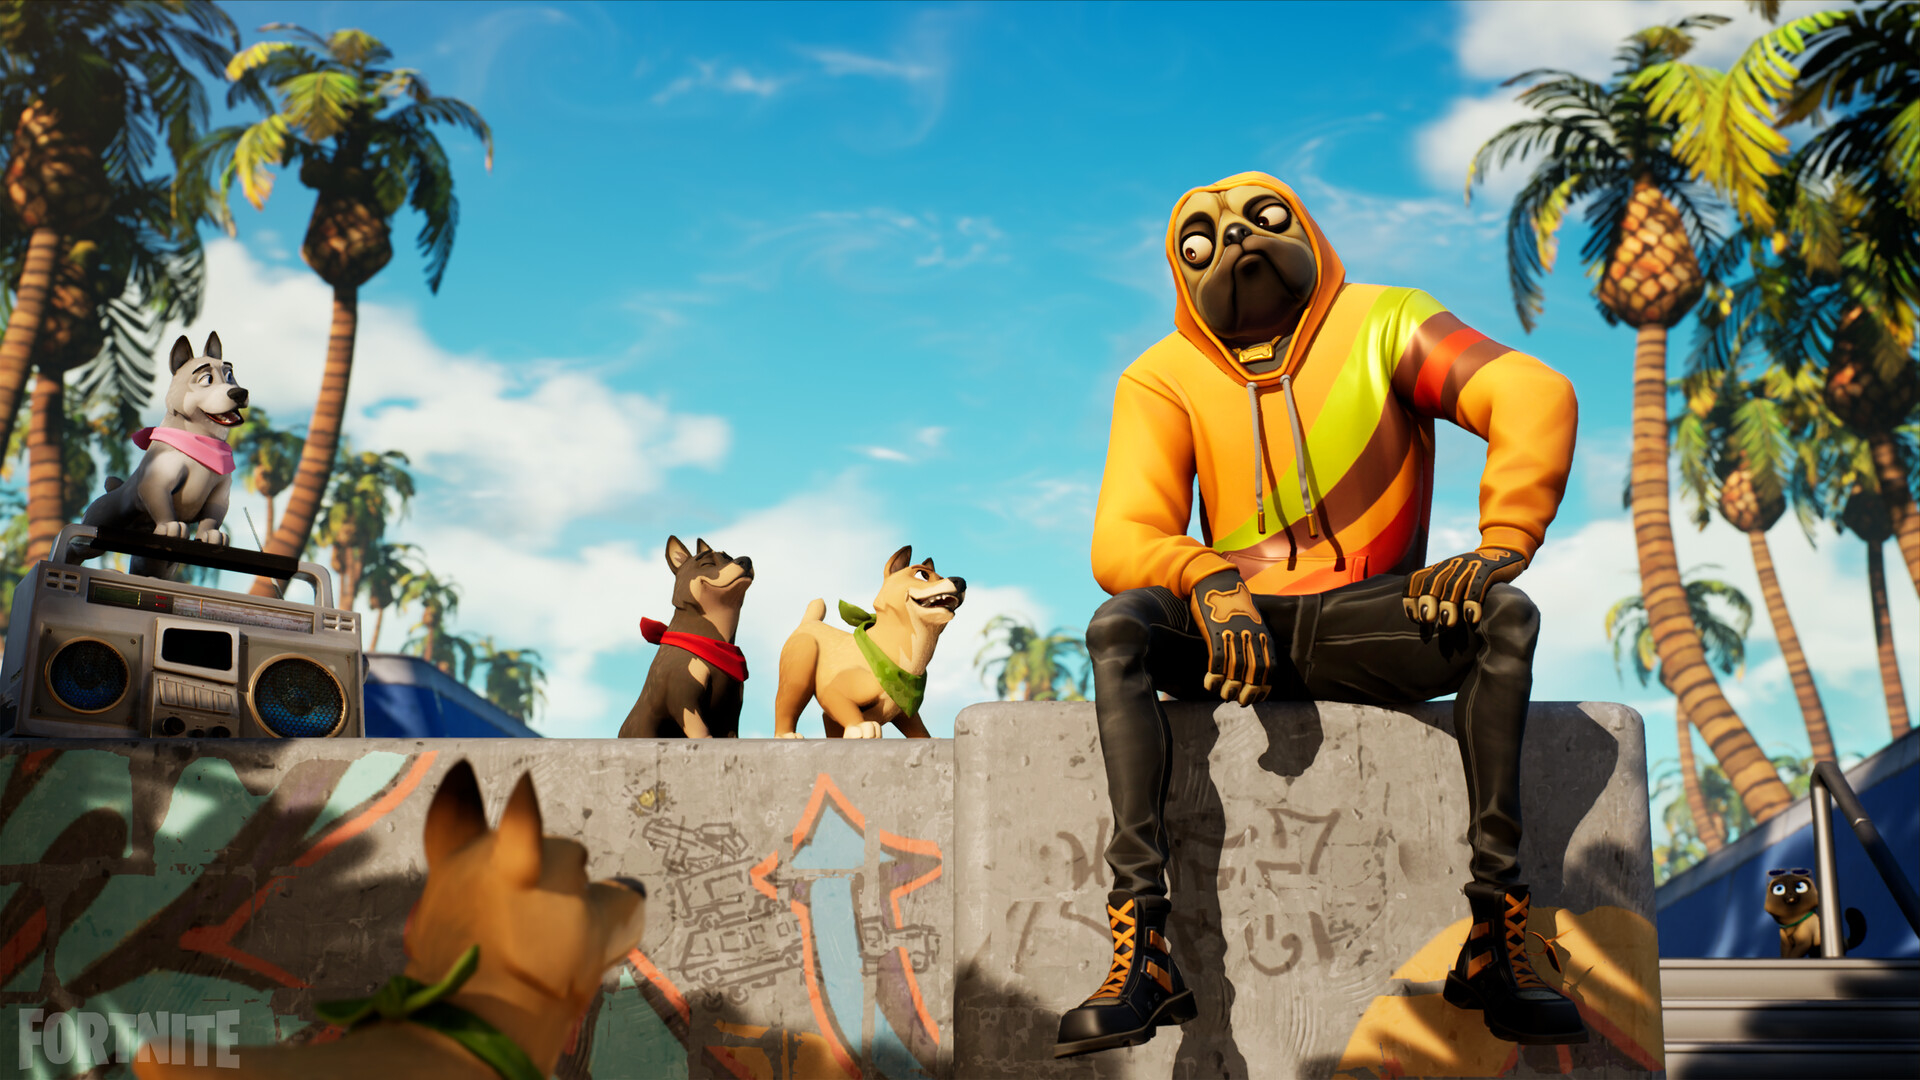 2048x1152 Fortnite Dog 2048x1152 Resolution Wallpaper Hd Games 4k Wallpapers Images Photos And Background